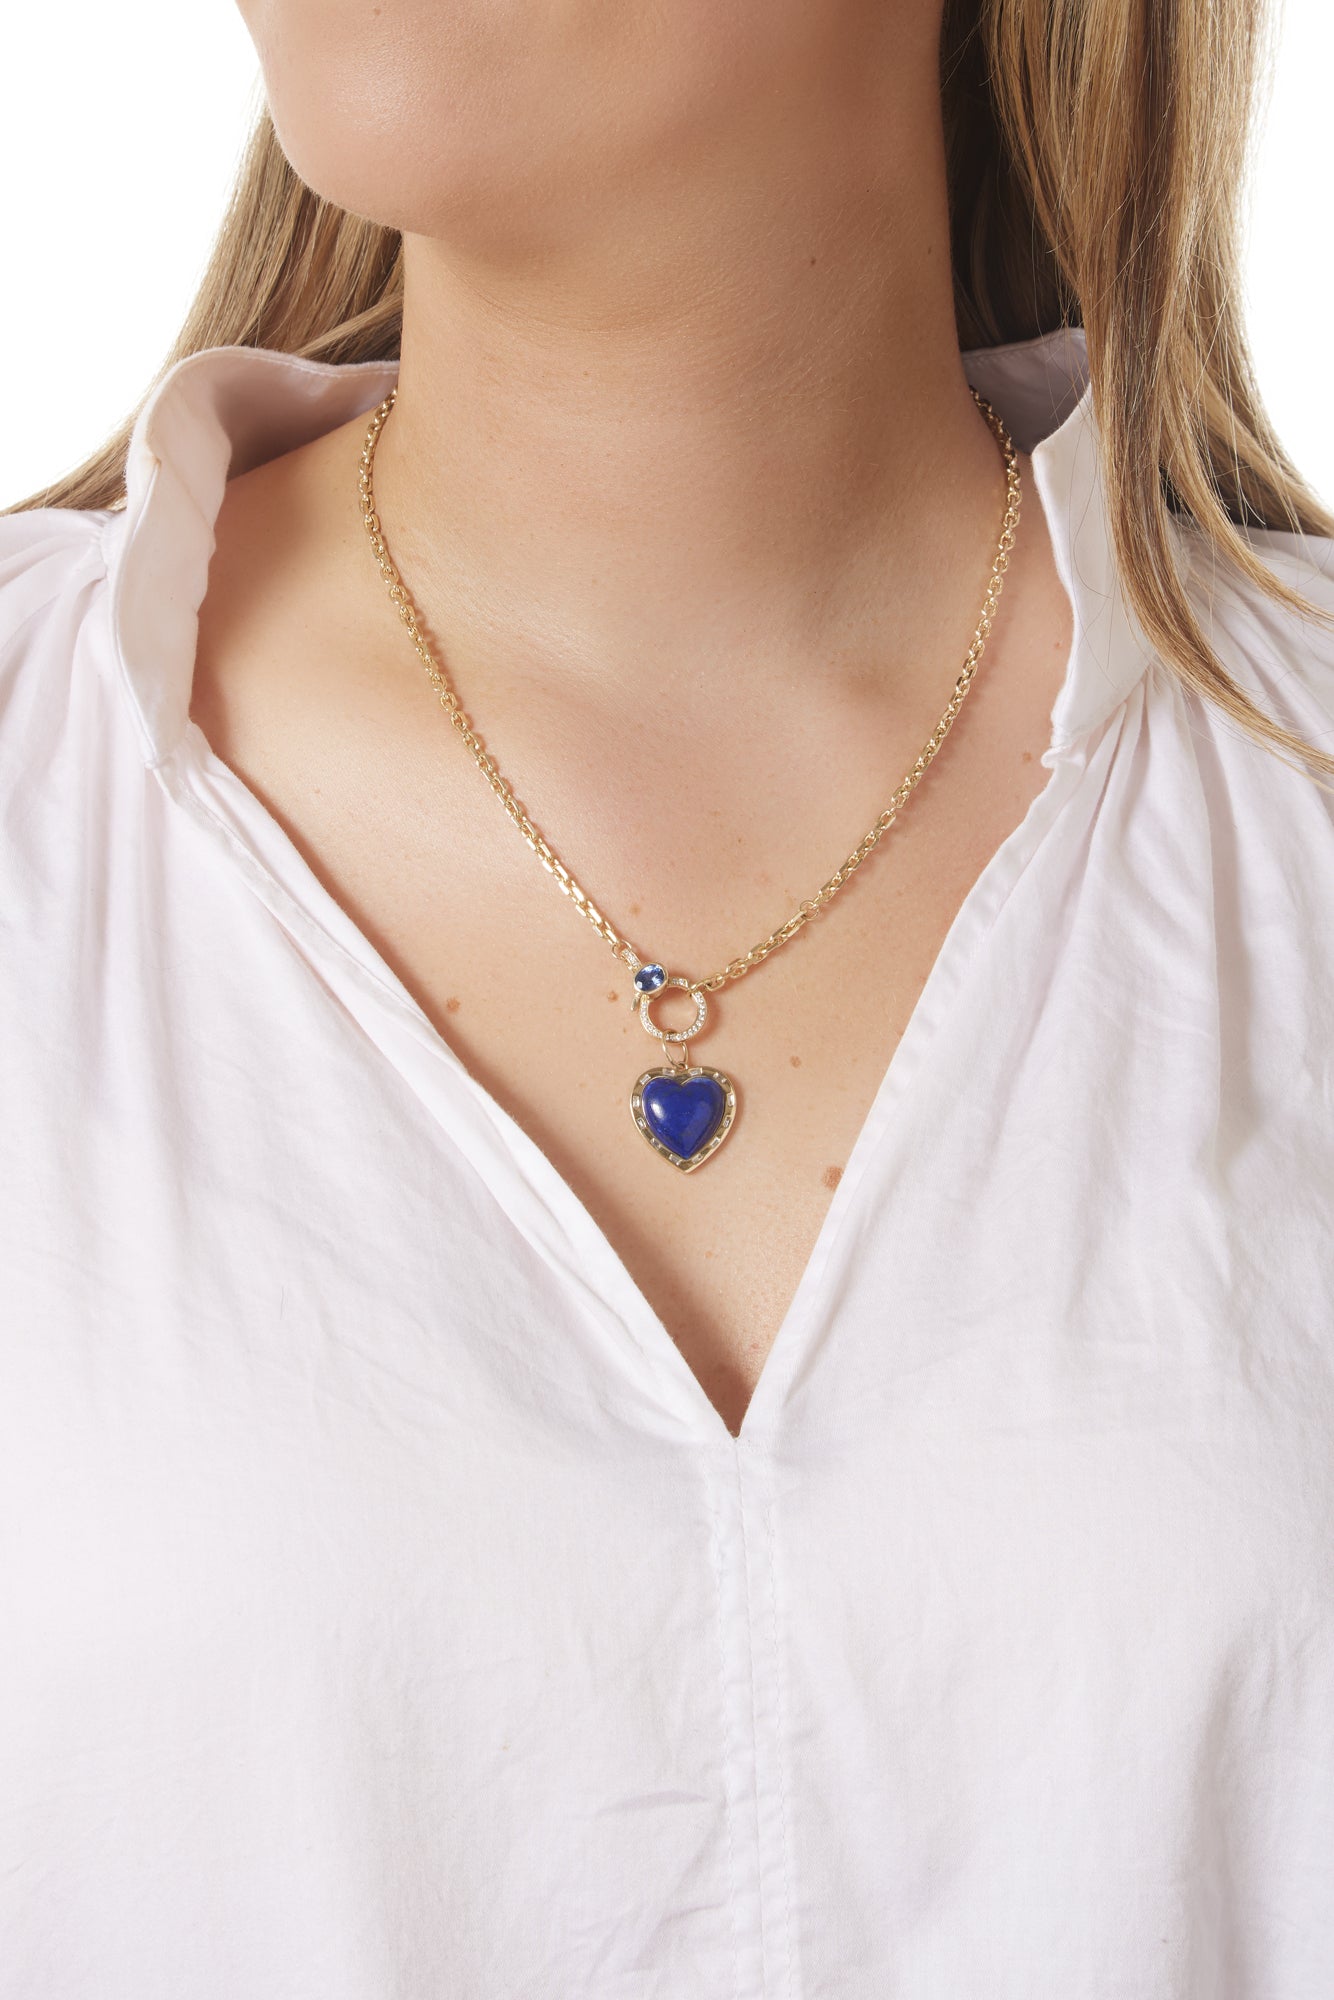 14KY Lapis Heart With Baguette Halo Charm